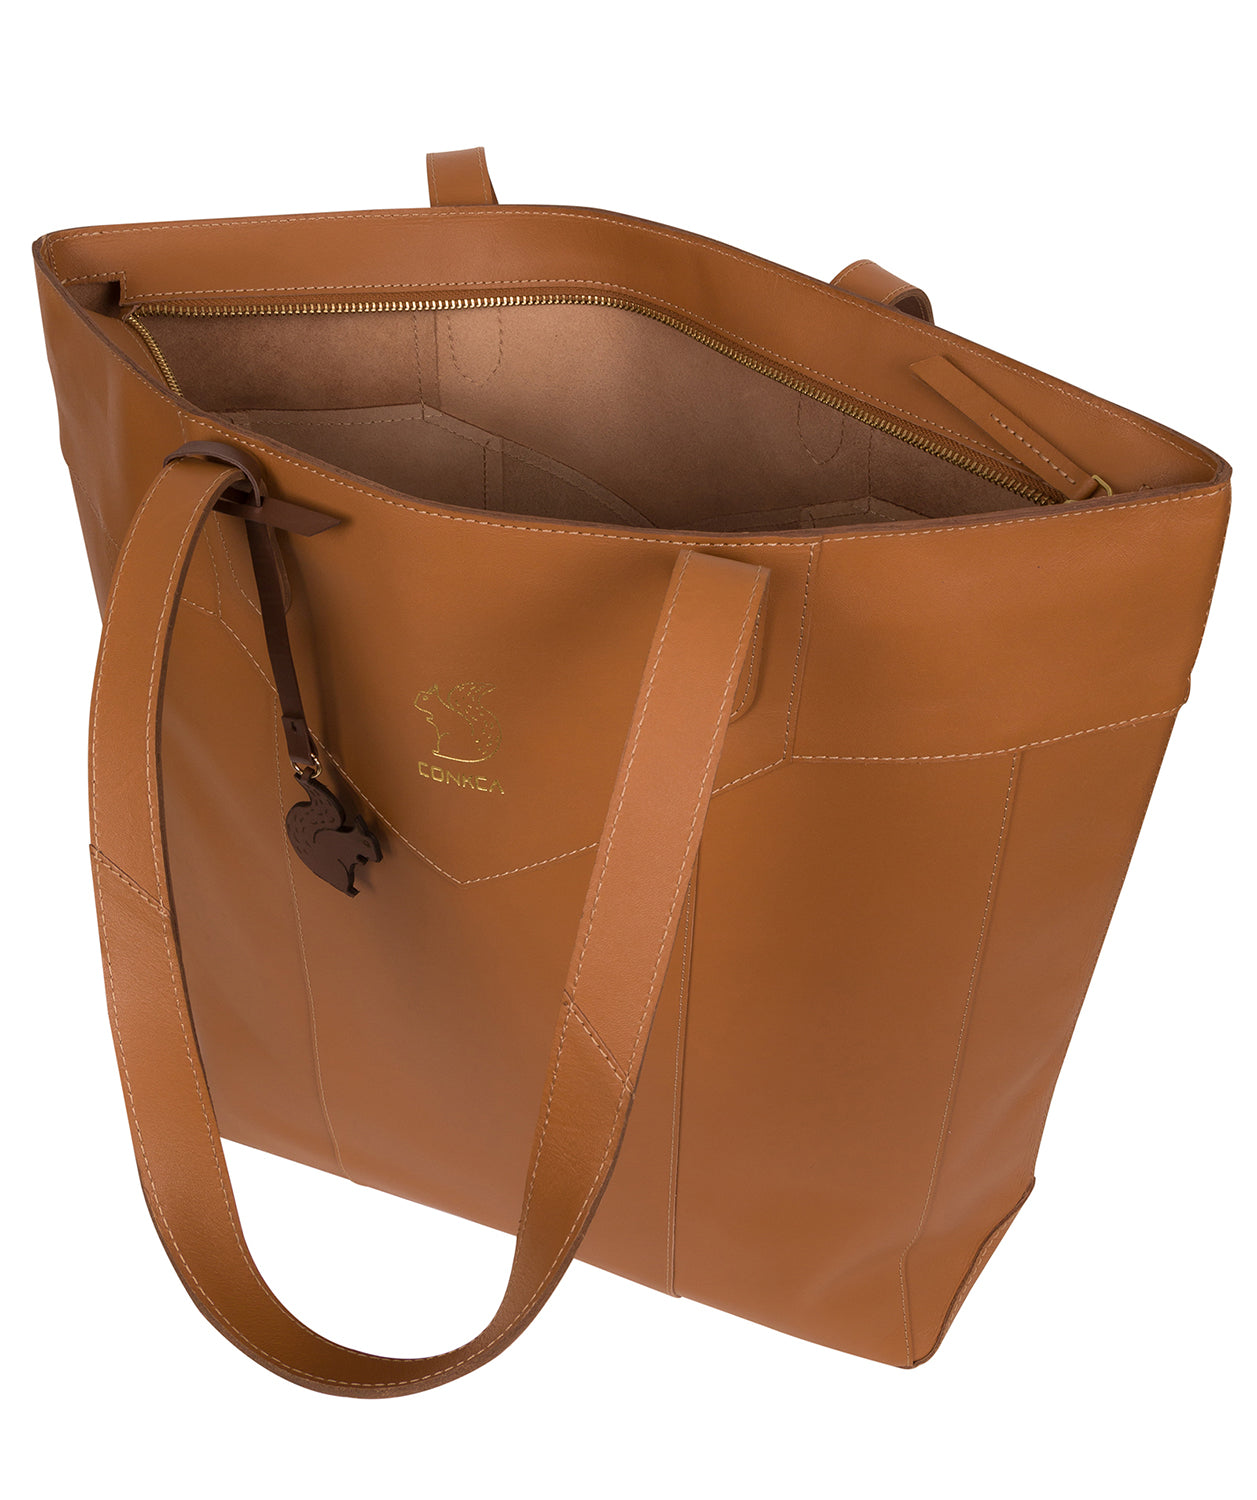 Tan Leather Tote Bag Eliza By Conkca London Pure Luxuries London 